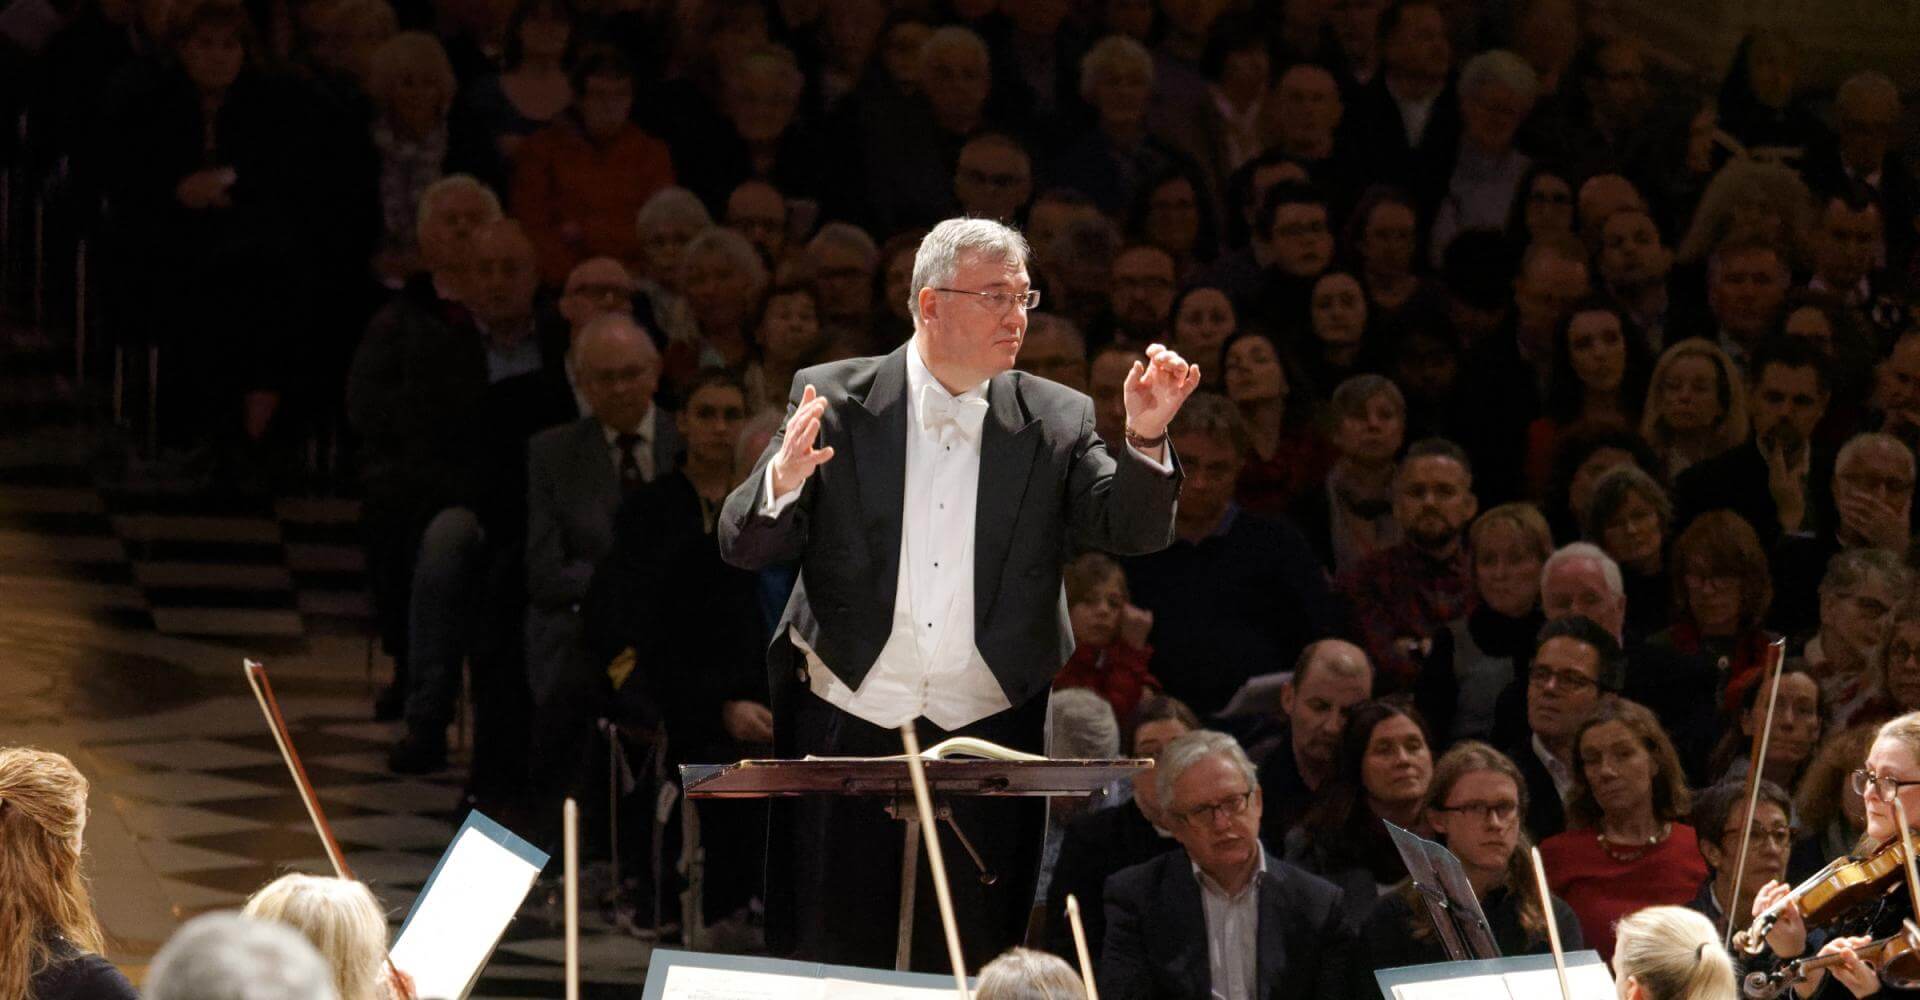 conductor orchestra stage music handels messiah